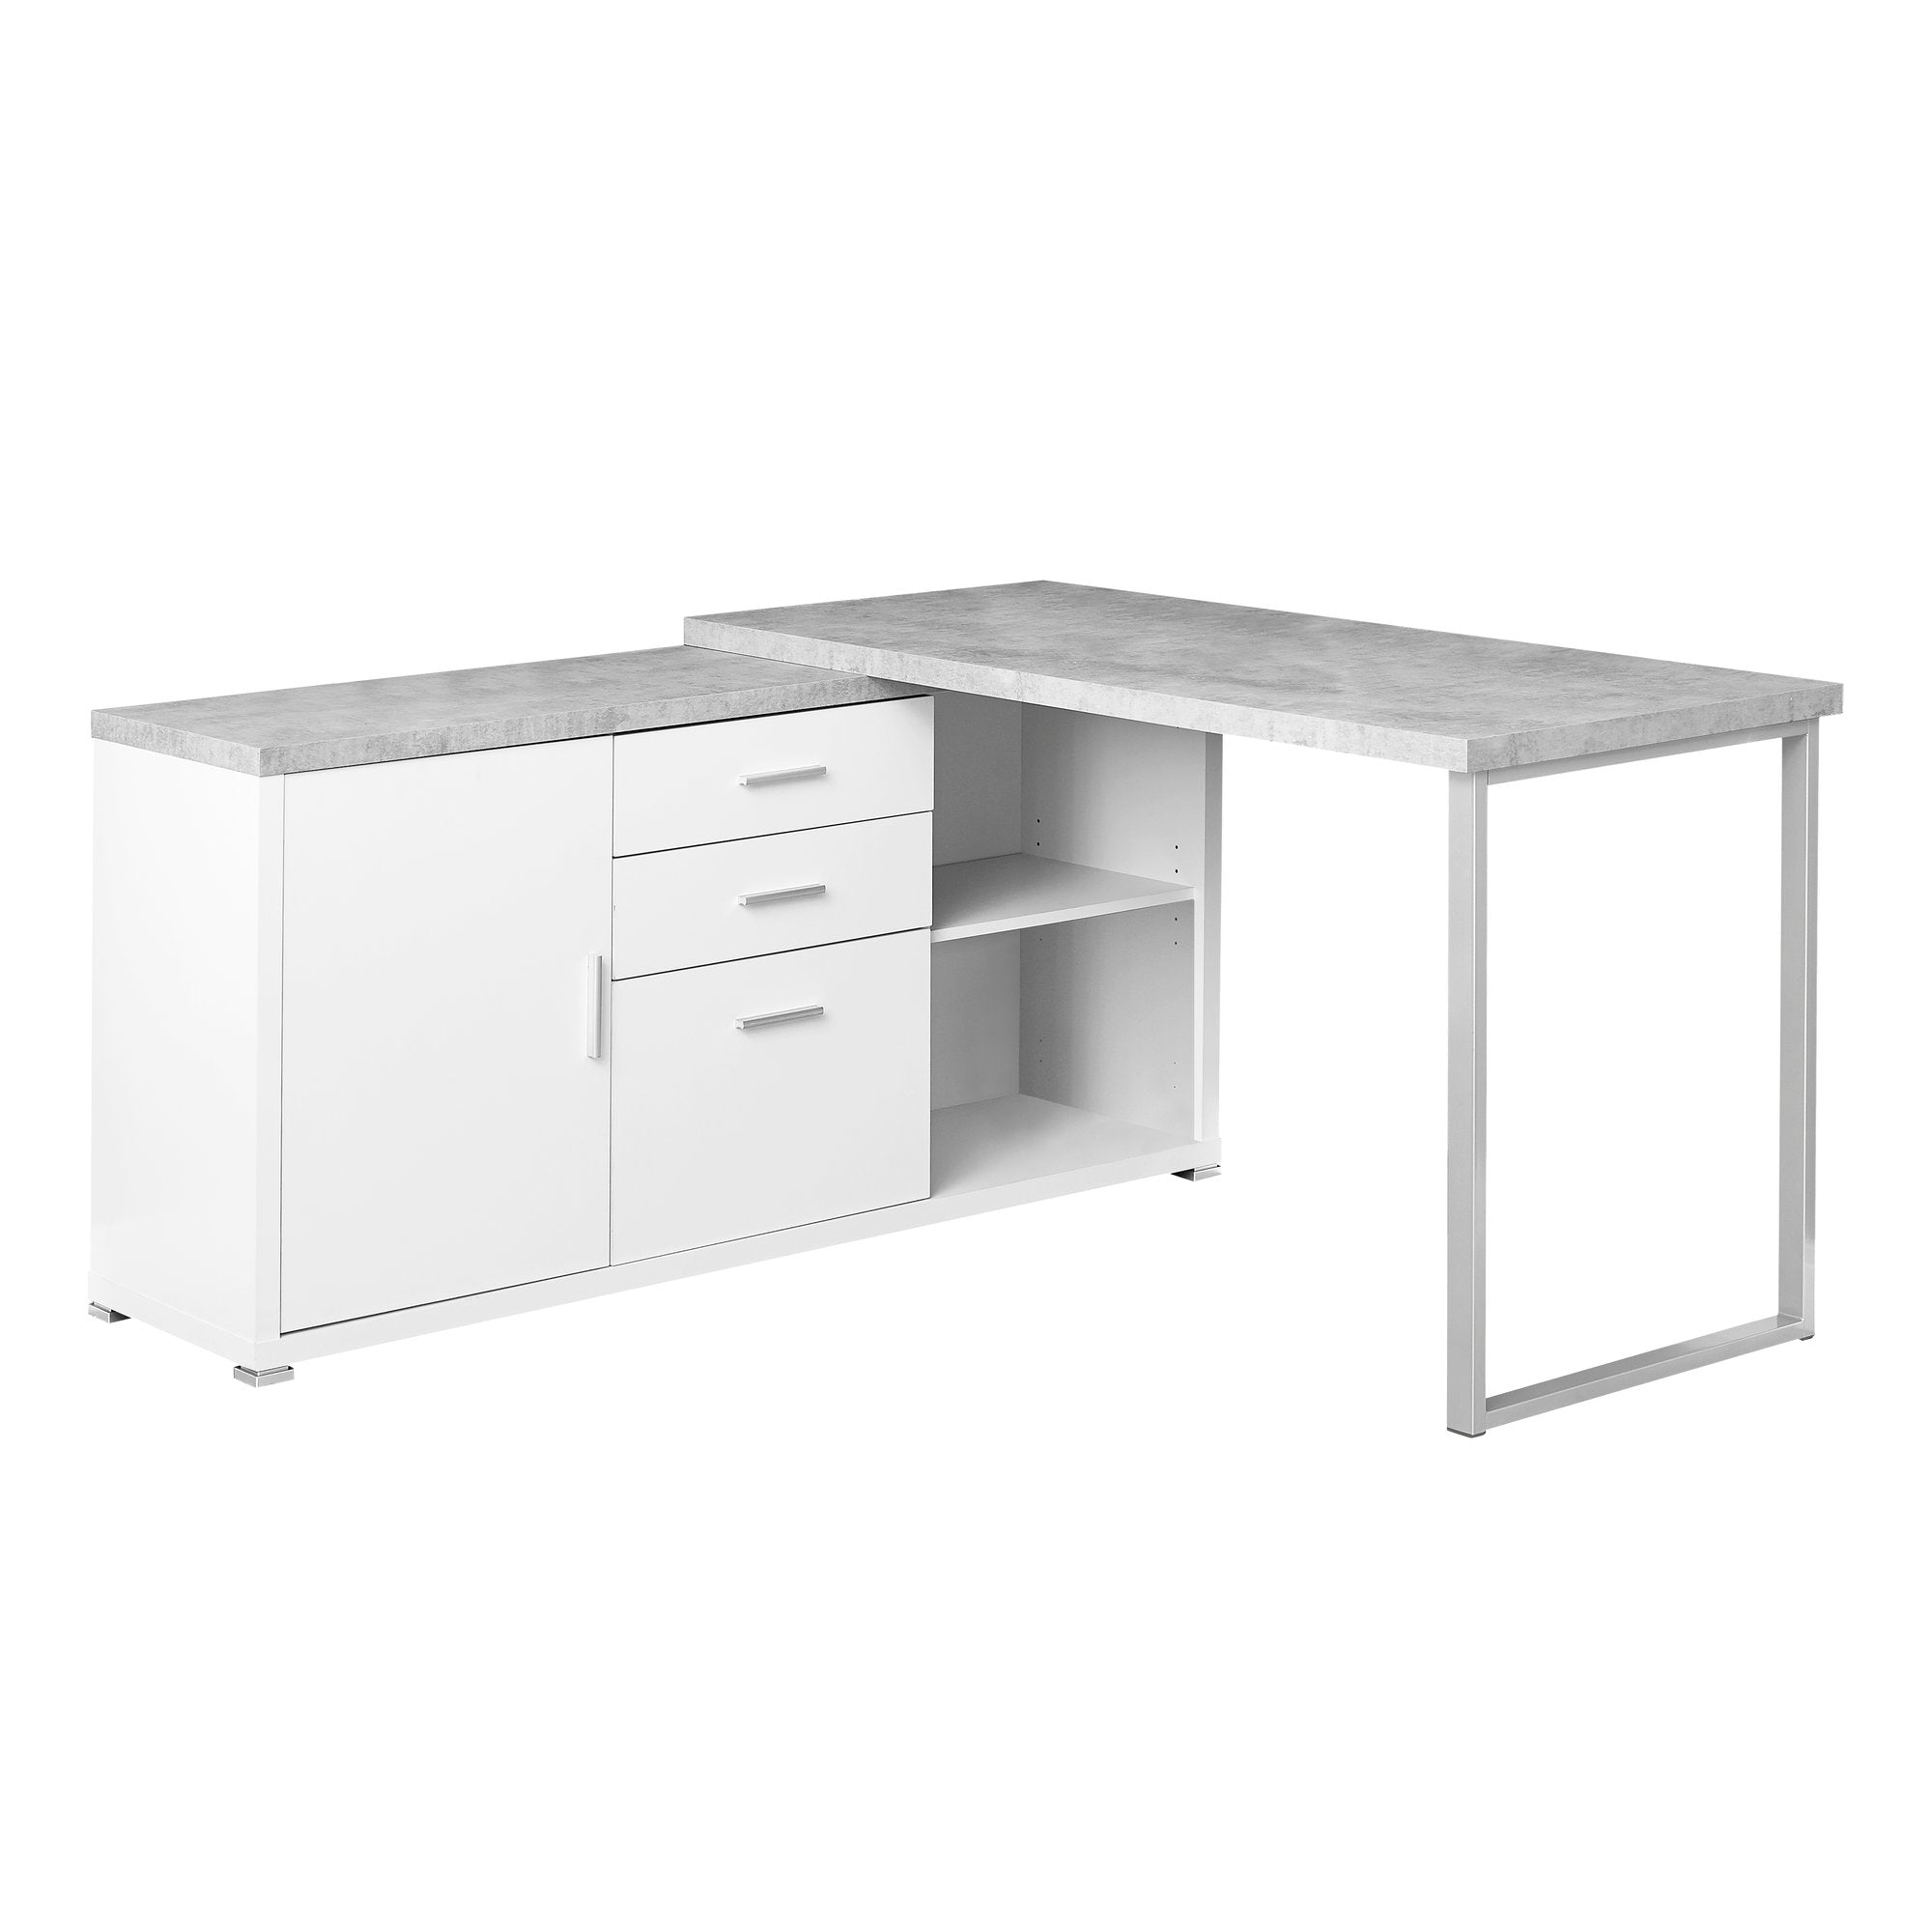 MN-887288    Computer Desk, Home Office, Corner, Left, Right Set-Up, Storage Drawers, 60"L, L Shape, Metal, Laminate, Grey Cement Look, Grey, Contemporary, Modern